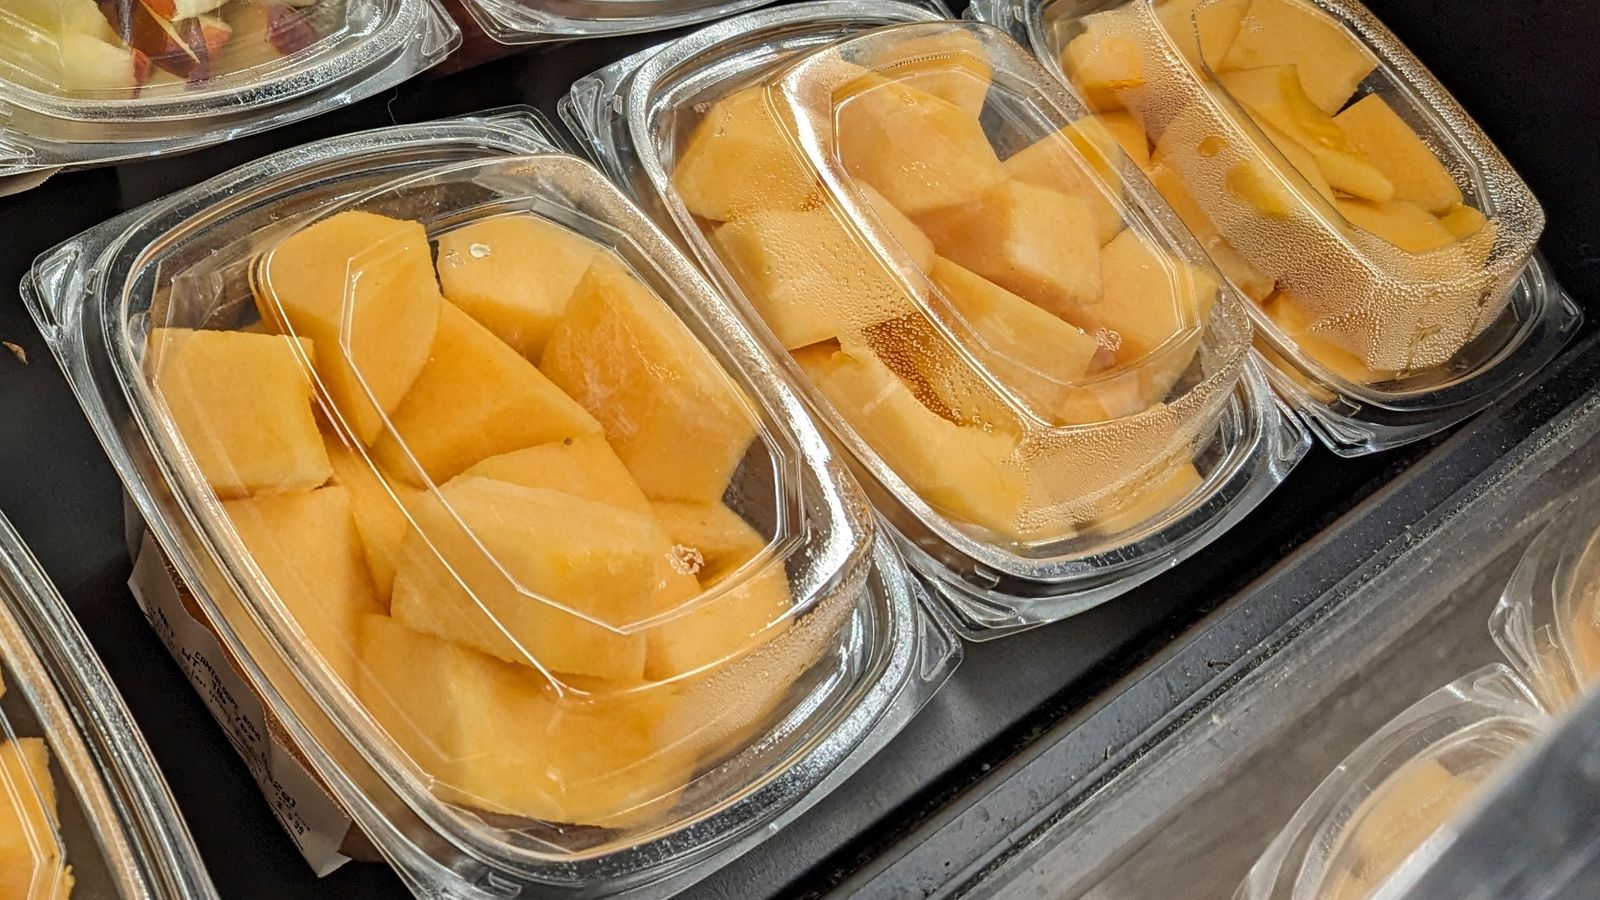 Eight people die from salmonella linked to cut cantaloupe melon in US and Canada